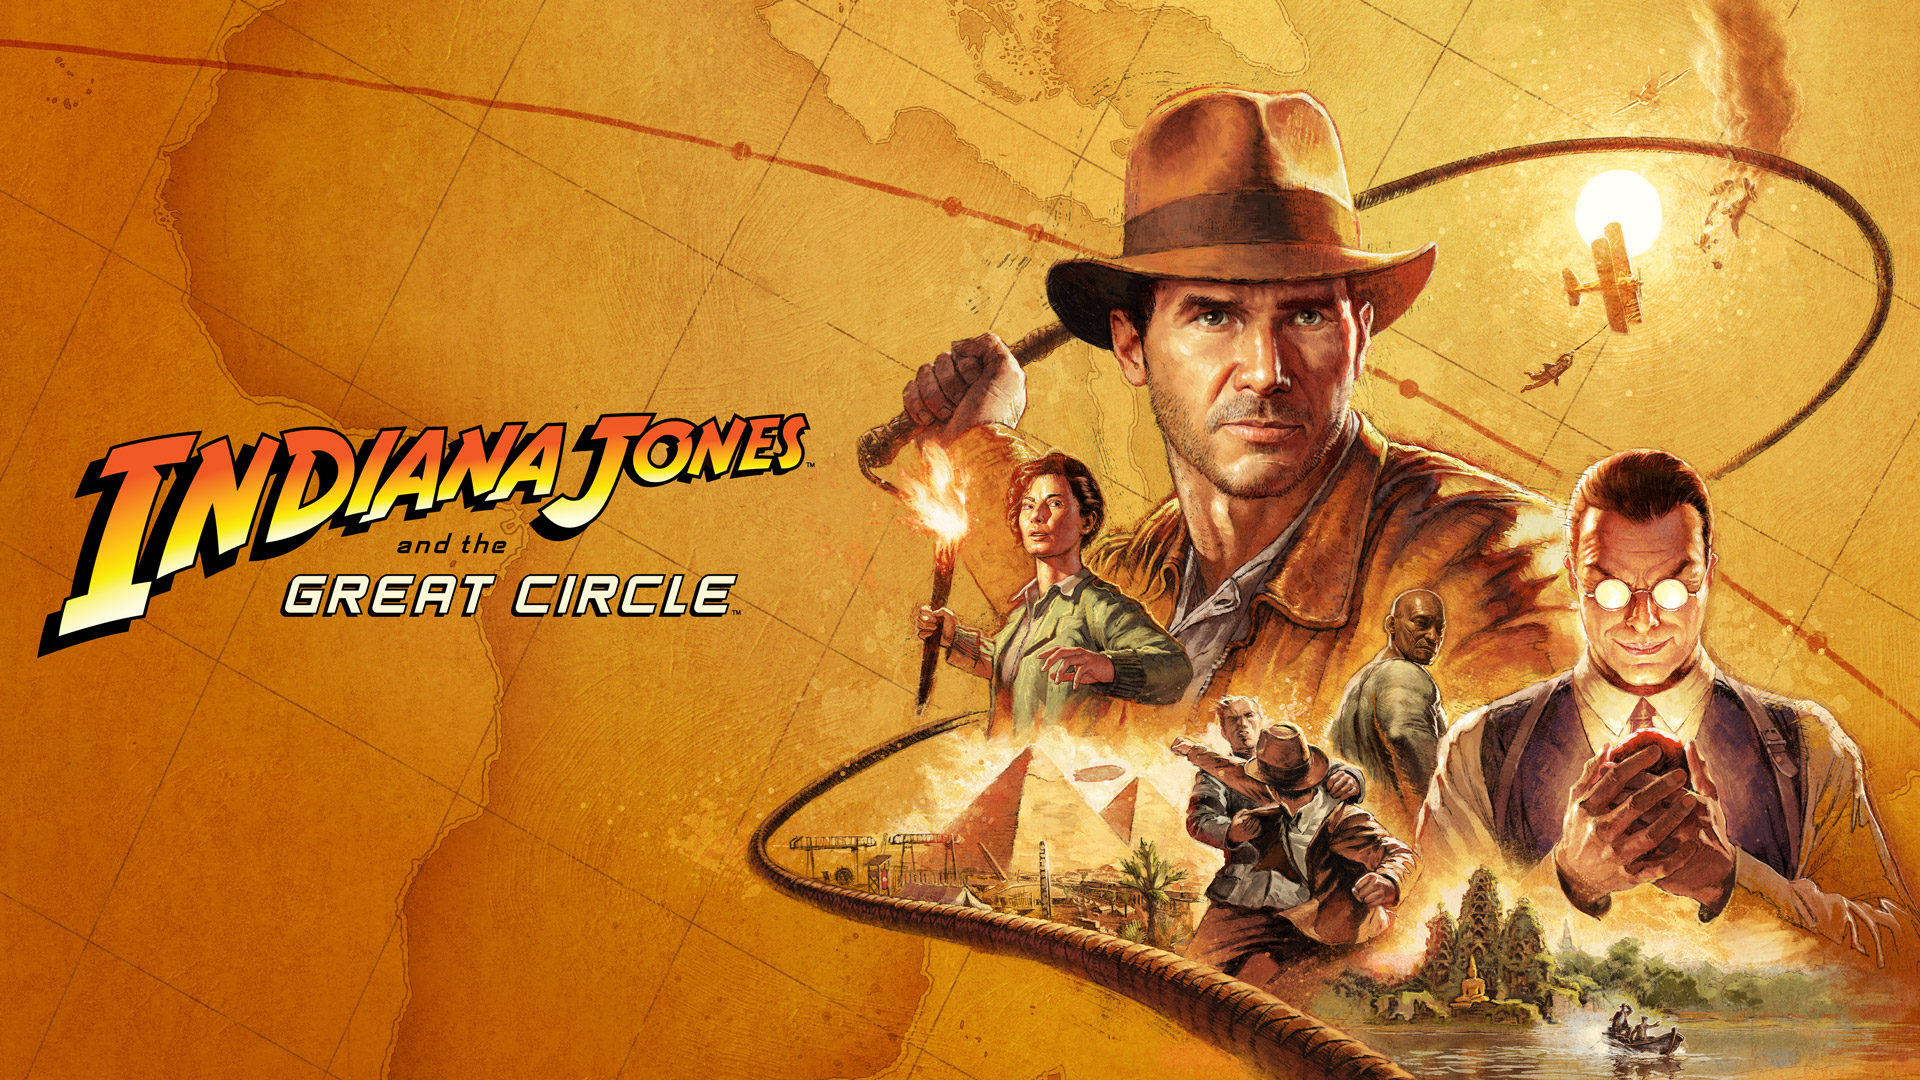 Indiana Jones and the Great Circle: New Details Revealed on the Official Xbox Podcast